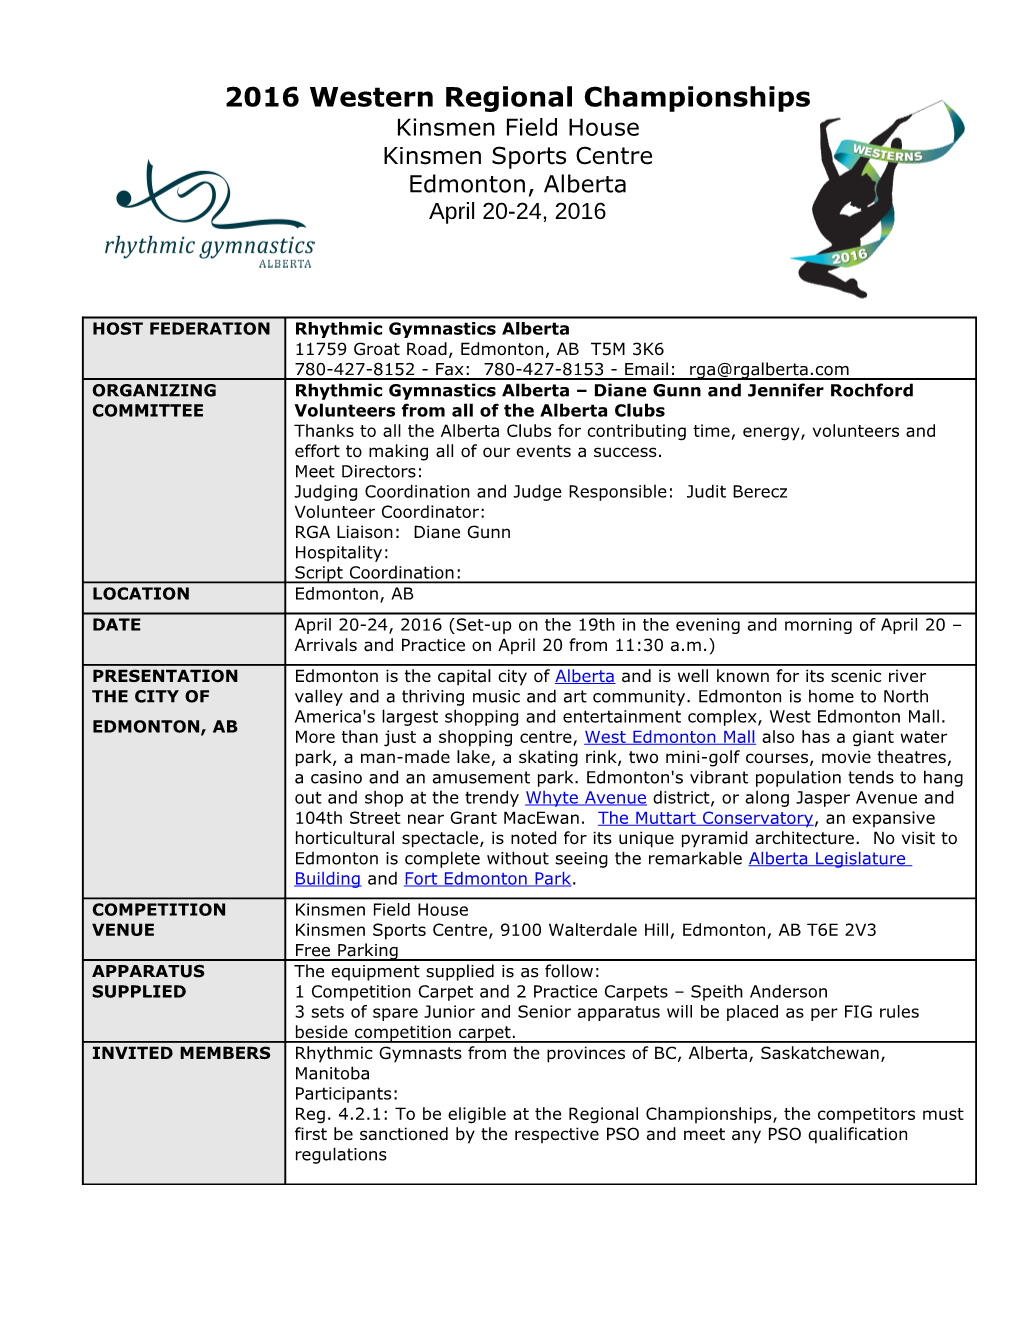 Waiver Form for Participation in Any Activity Related to Rhythmic Gymnastics